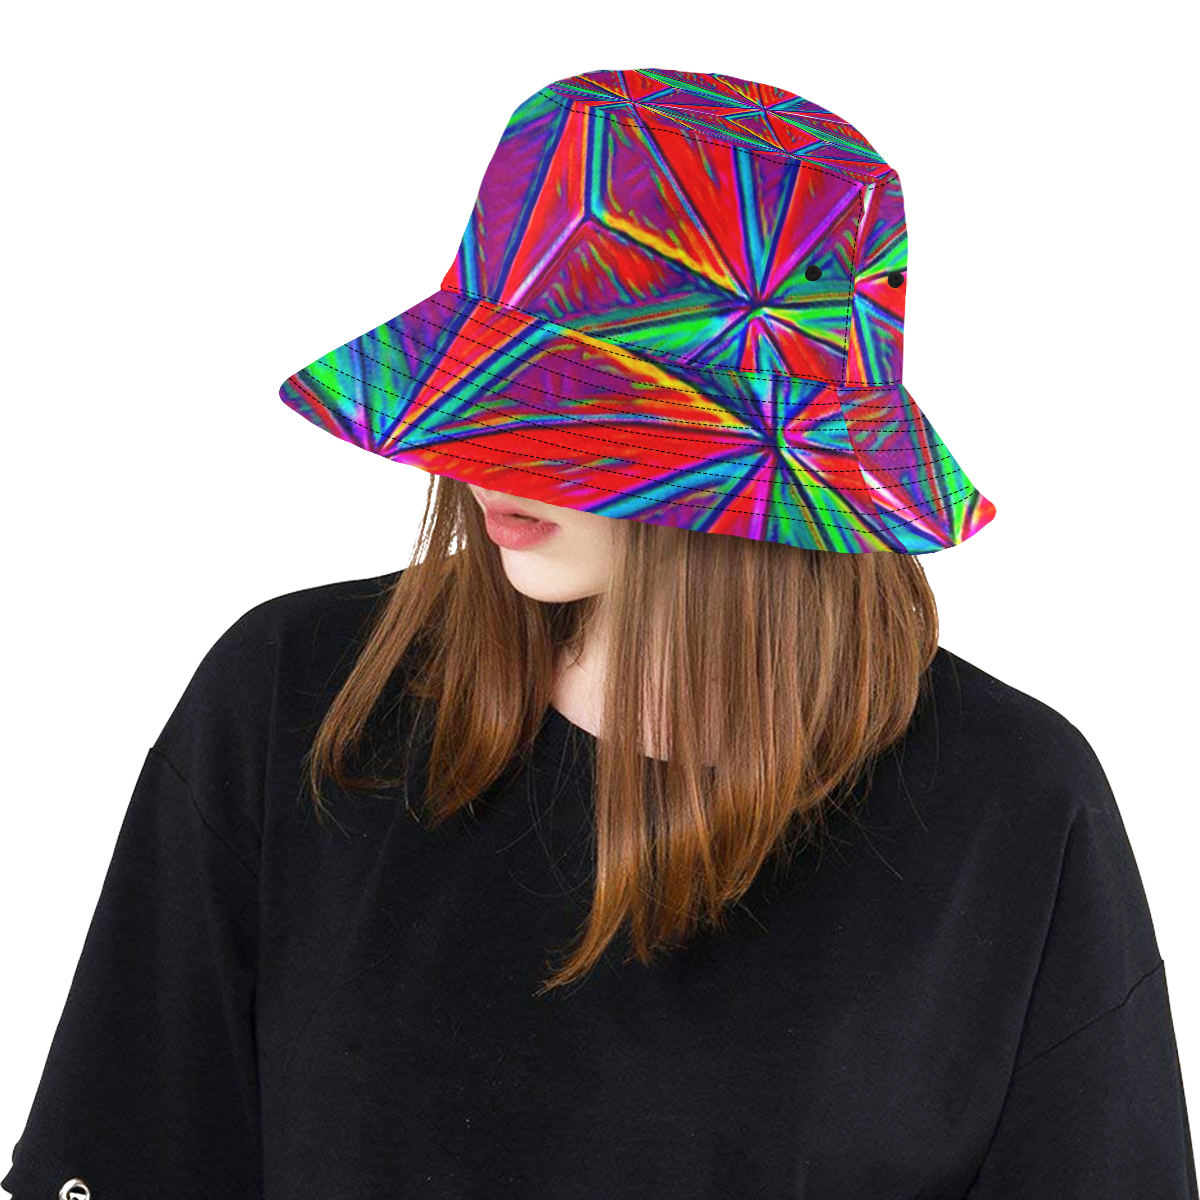 Vivid Life 1A by JamColors All Over Print Bucket Hat